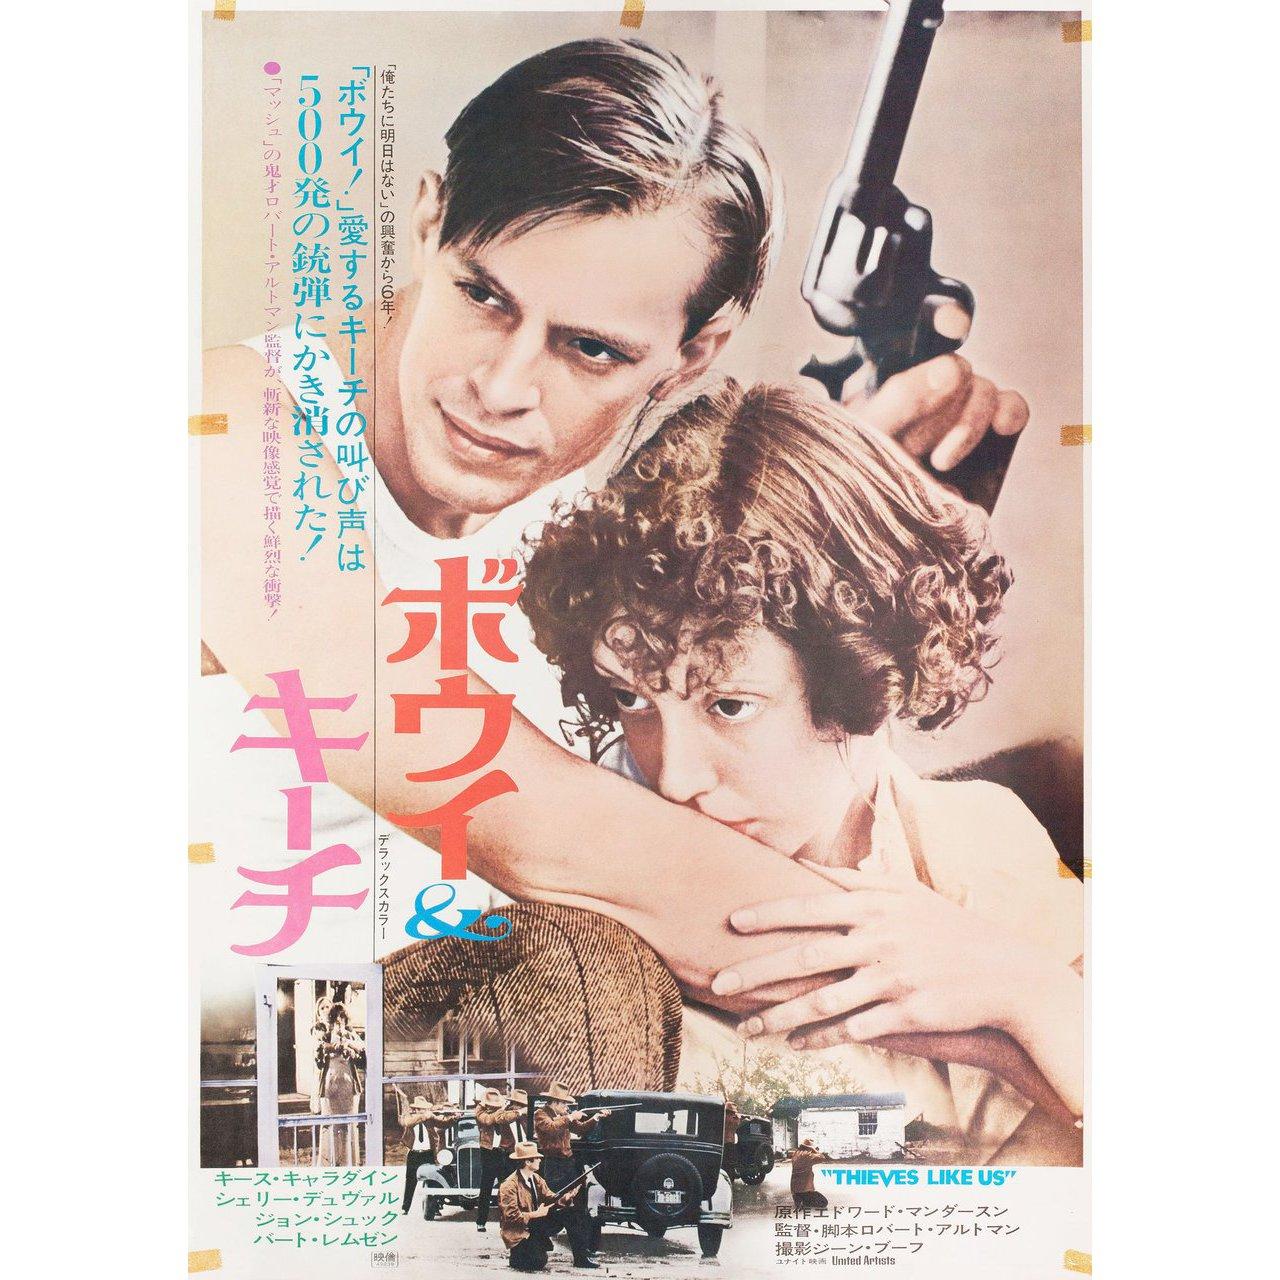 Original 1974 Japanese B2 poster for the film ‘Thieves Like Us’ directed by Robert Altman with Keith Carradine / Shelley Duvall / John Schuck / Bert Remsen. Very Good-Fine condition, rolled with tape stains. Please note: the size is stated in inches